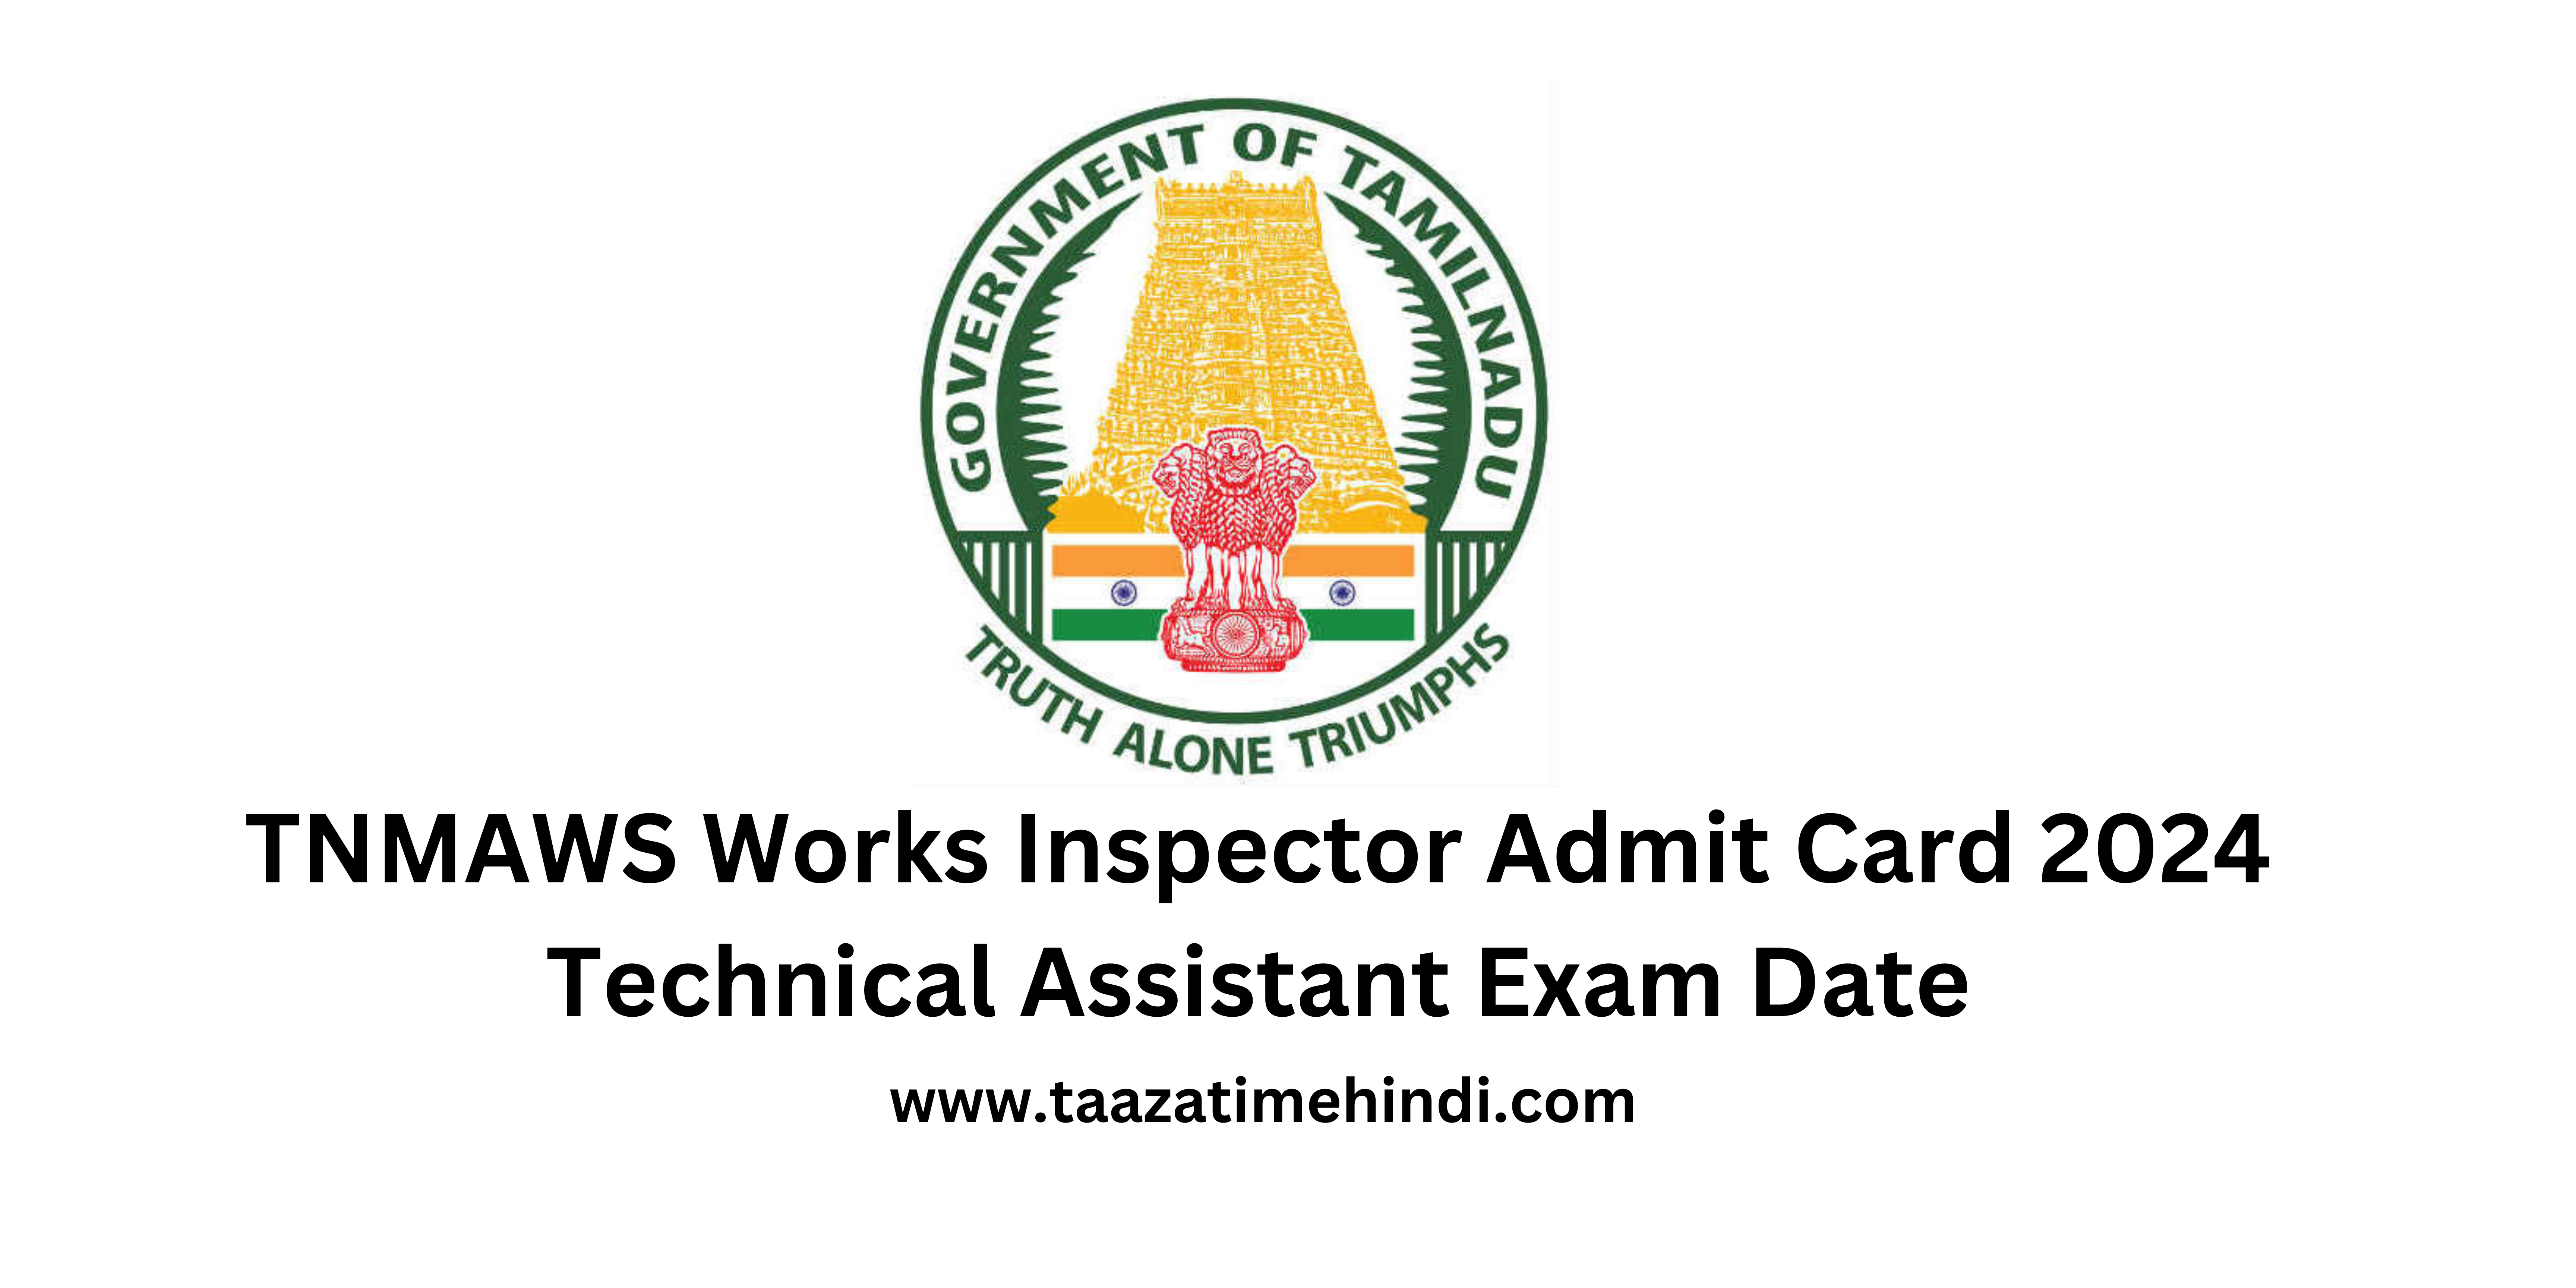 TNMAWS Works Inspector Admit Card 2024 Technical Assistant Exam Date